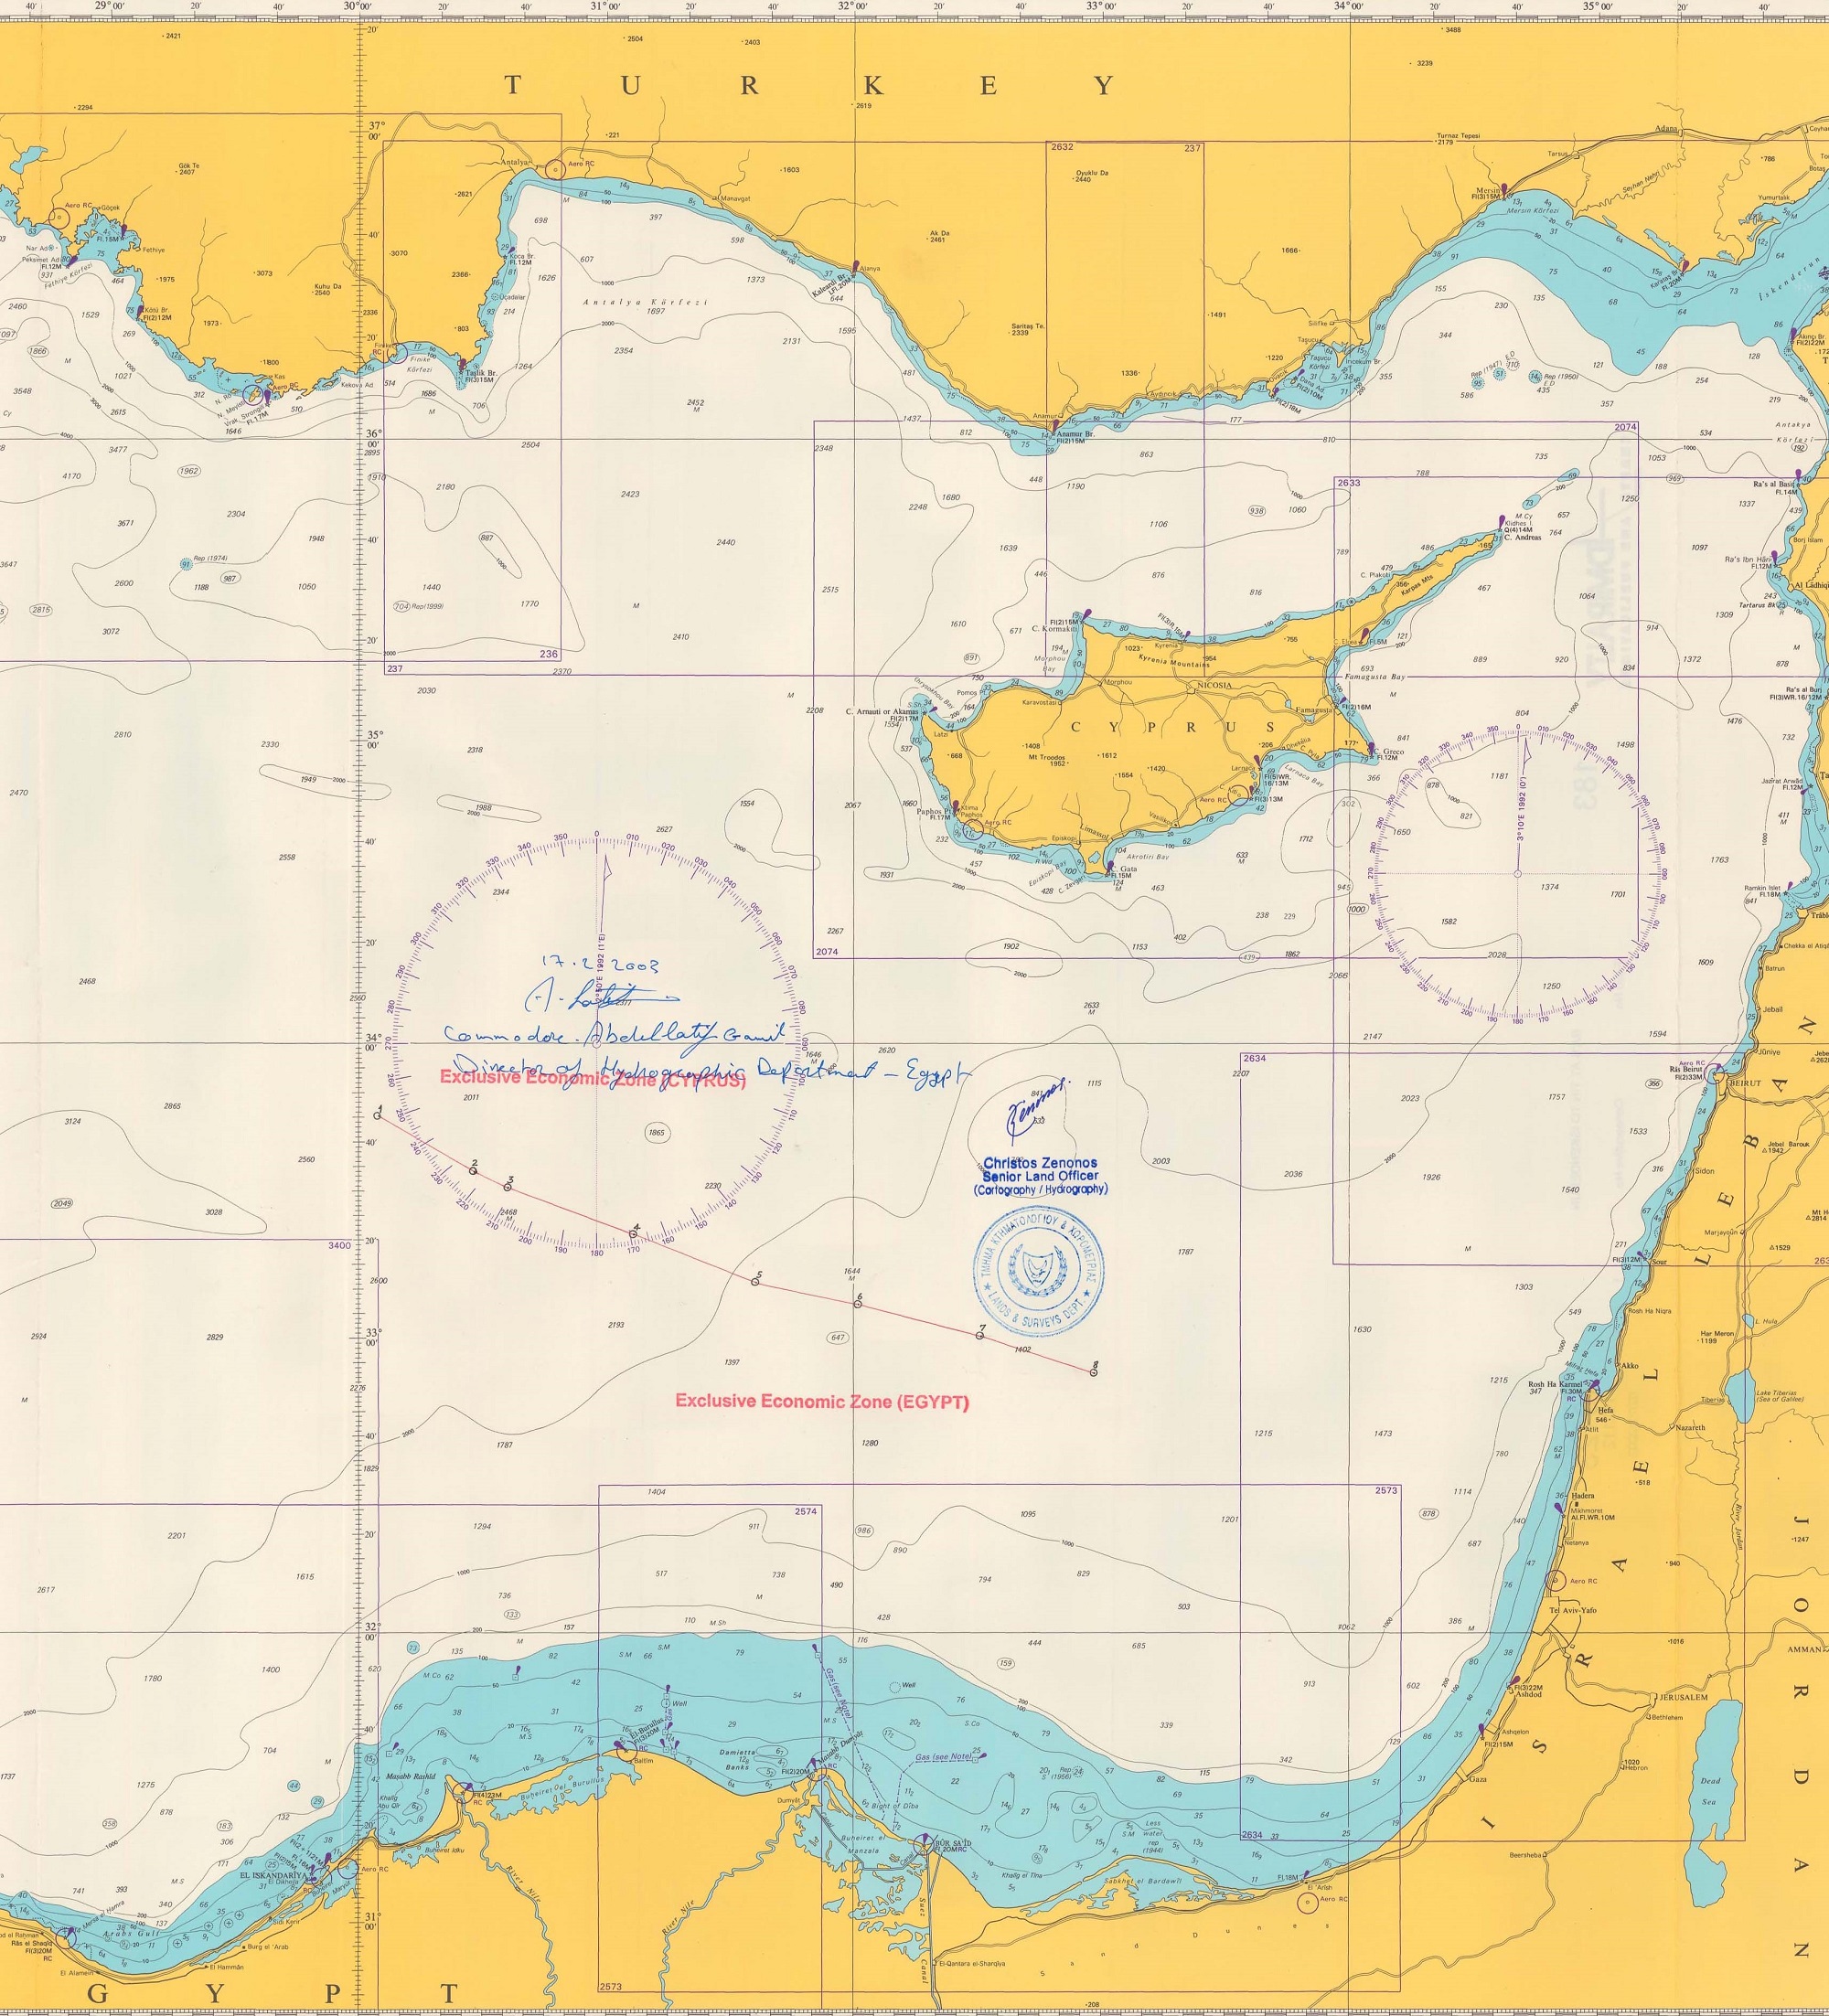 Cyprus claim about delimitation of the exclusive economic zone Republic of Cyprus and the Arab Republic of Egypt